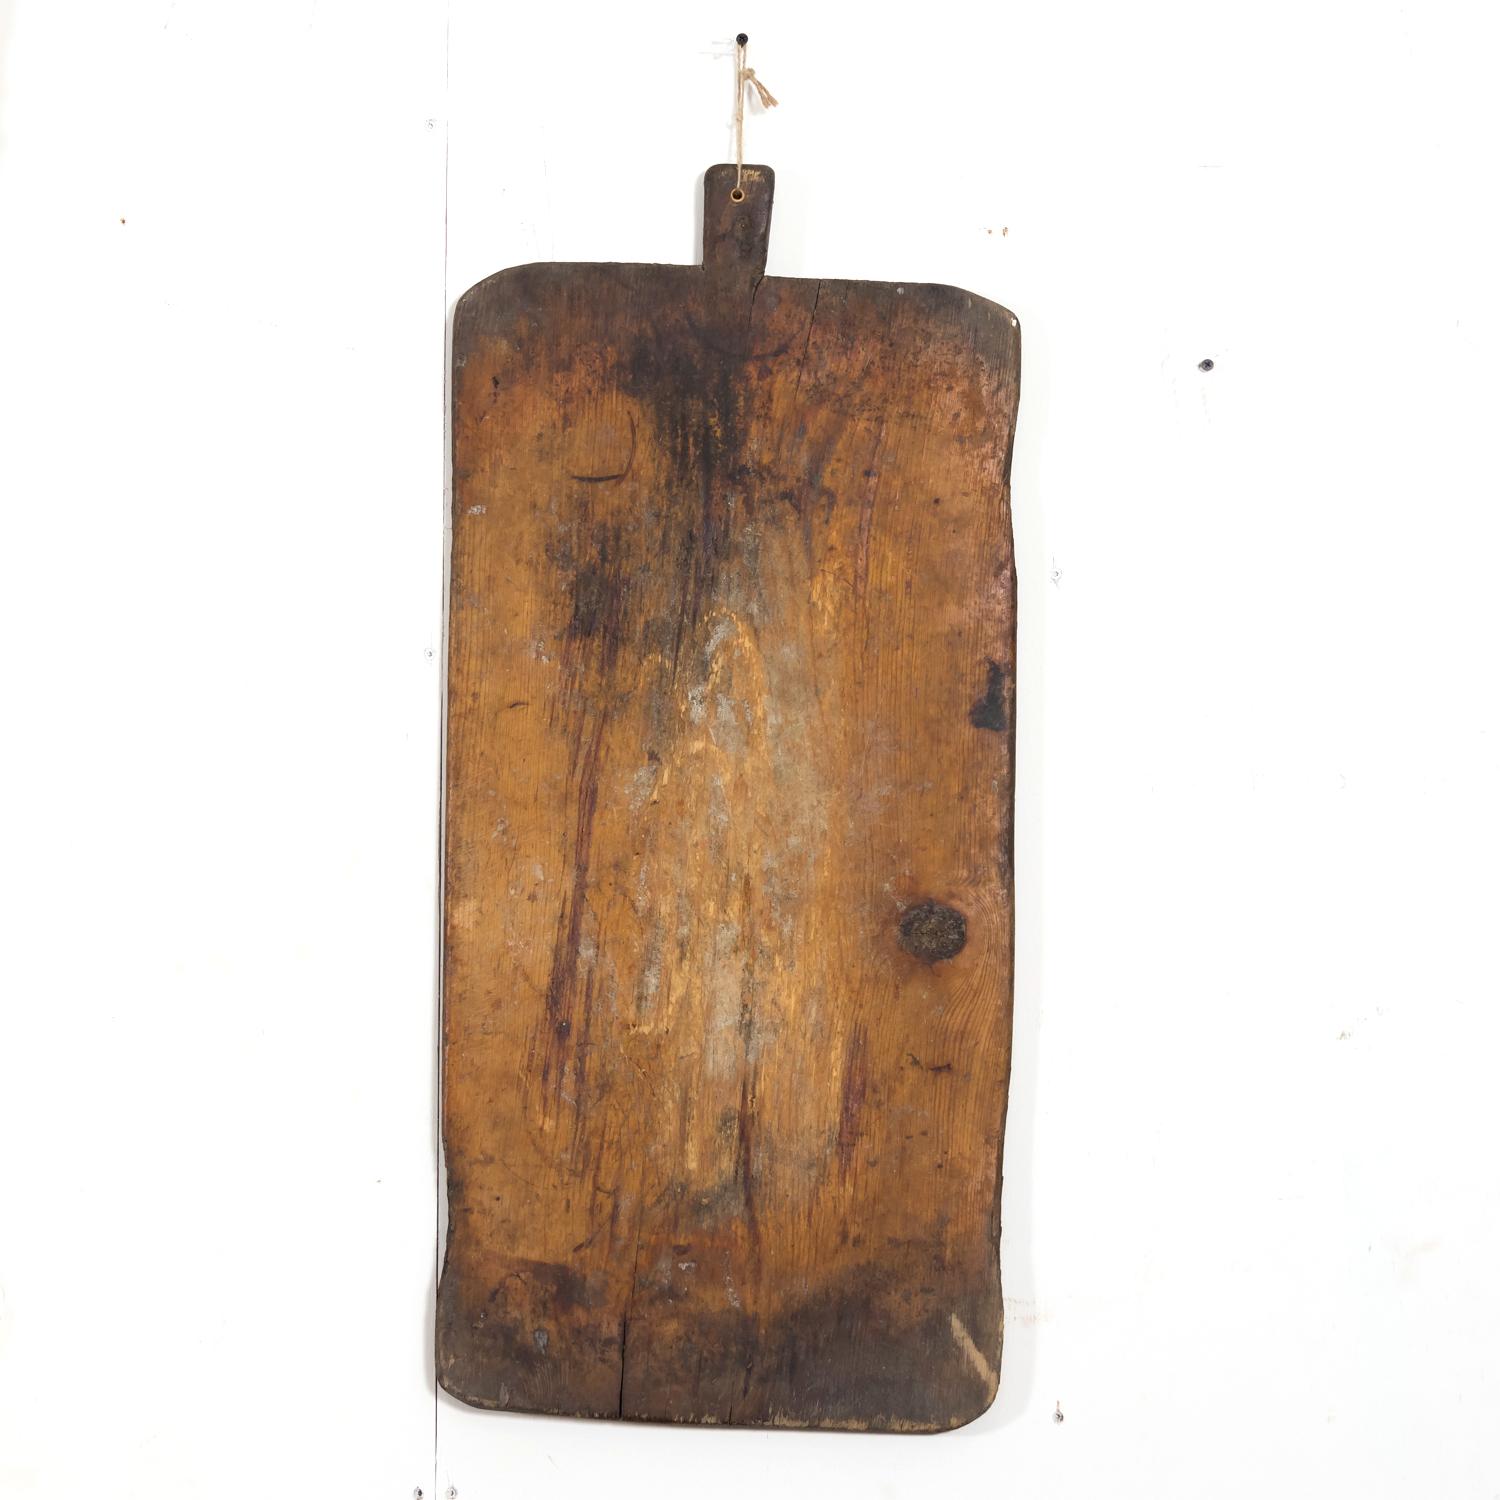 A wonderful large 19th century French cutting board with jute string for hanging, circa 1890s. Having a fantastic timeworn patina on both sides, showing knife marks and darkening that happens only after decades of use, this antique board will add a